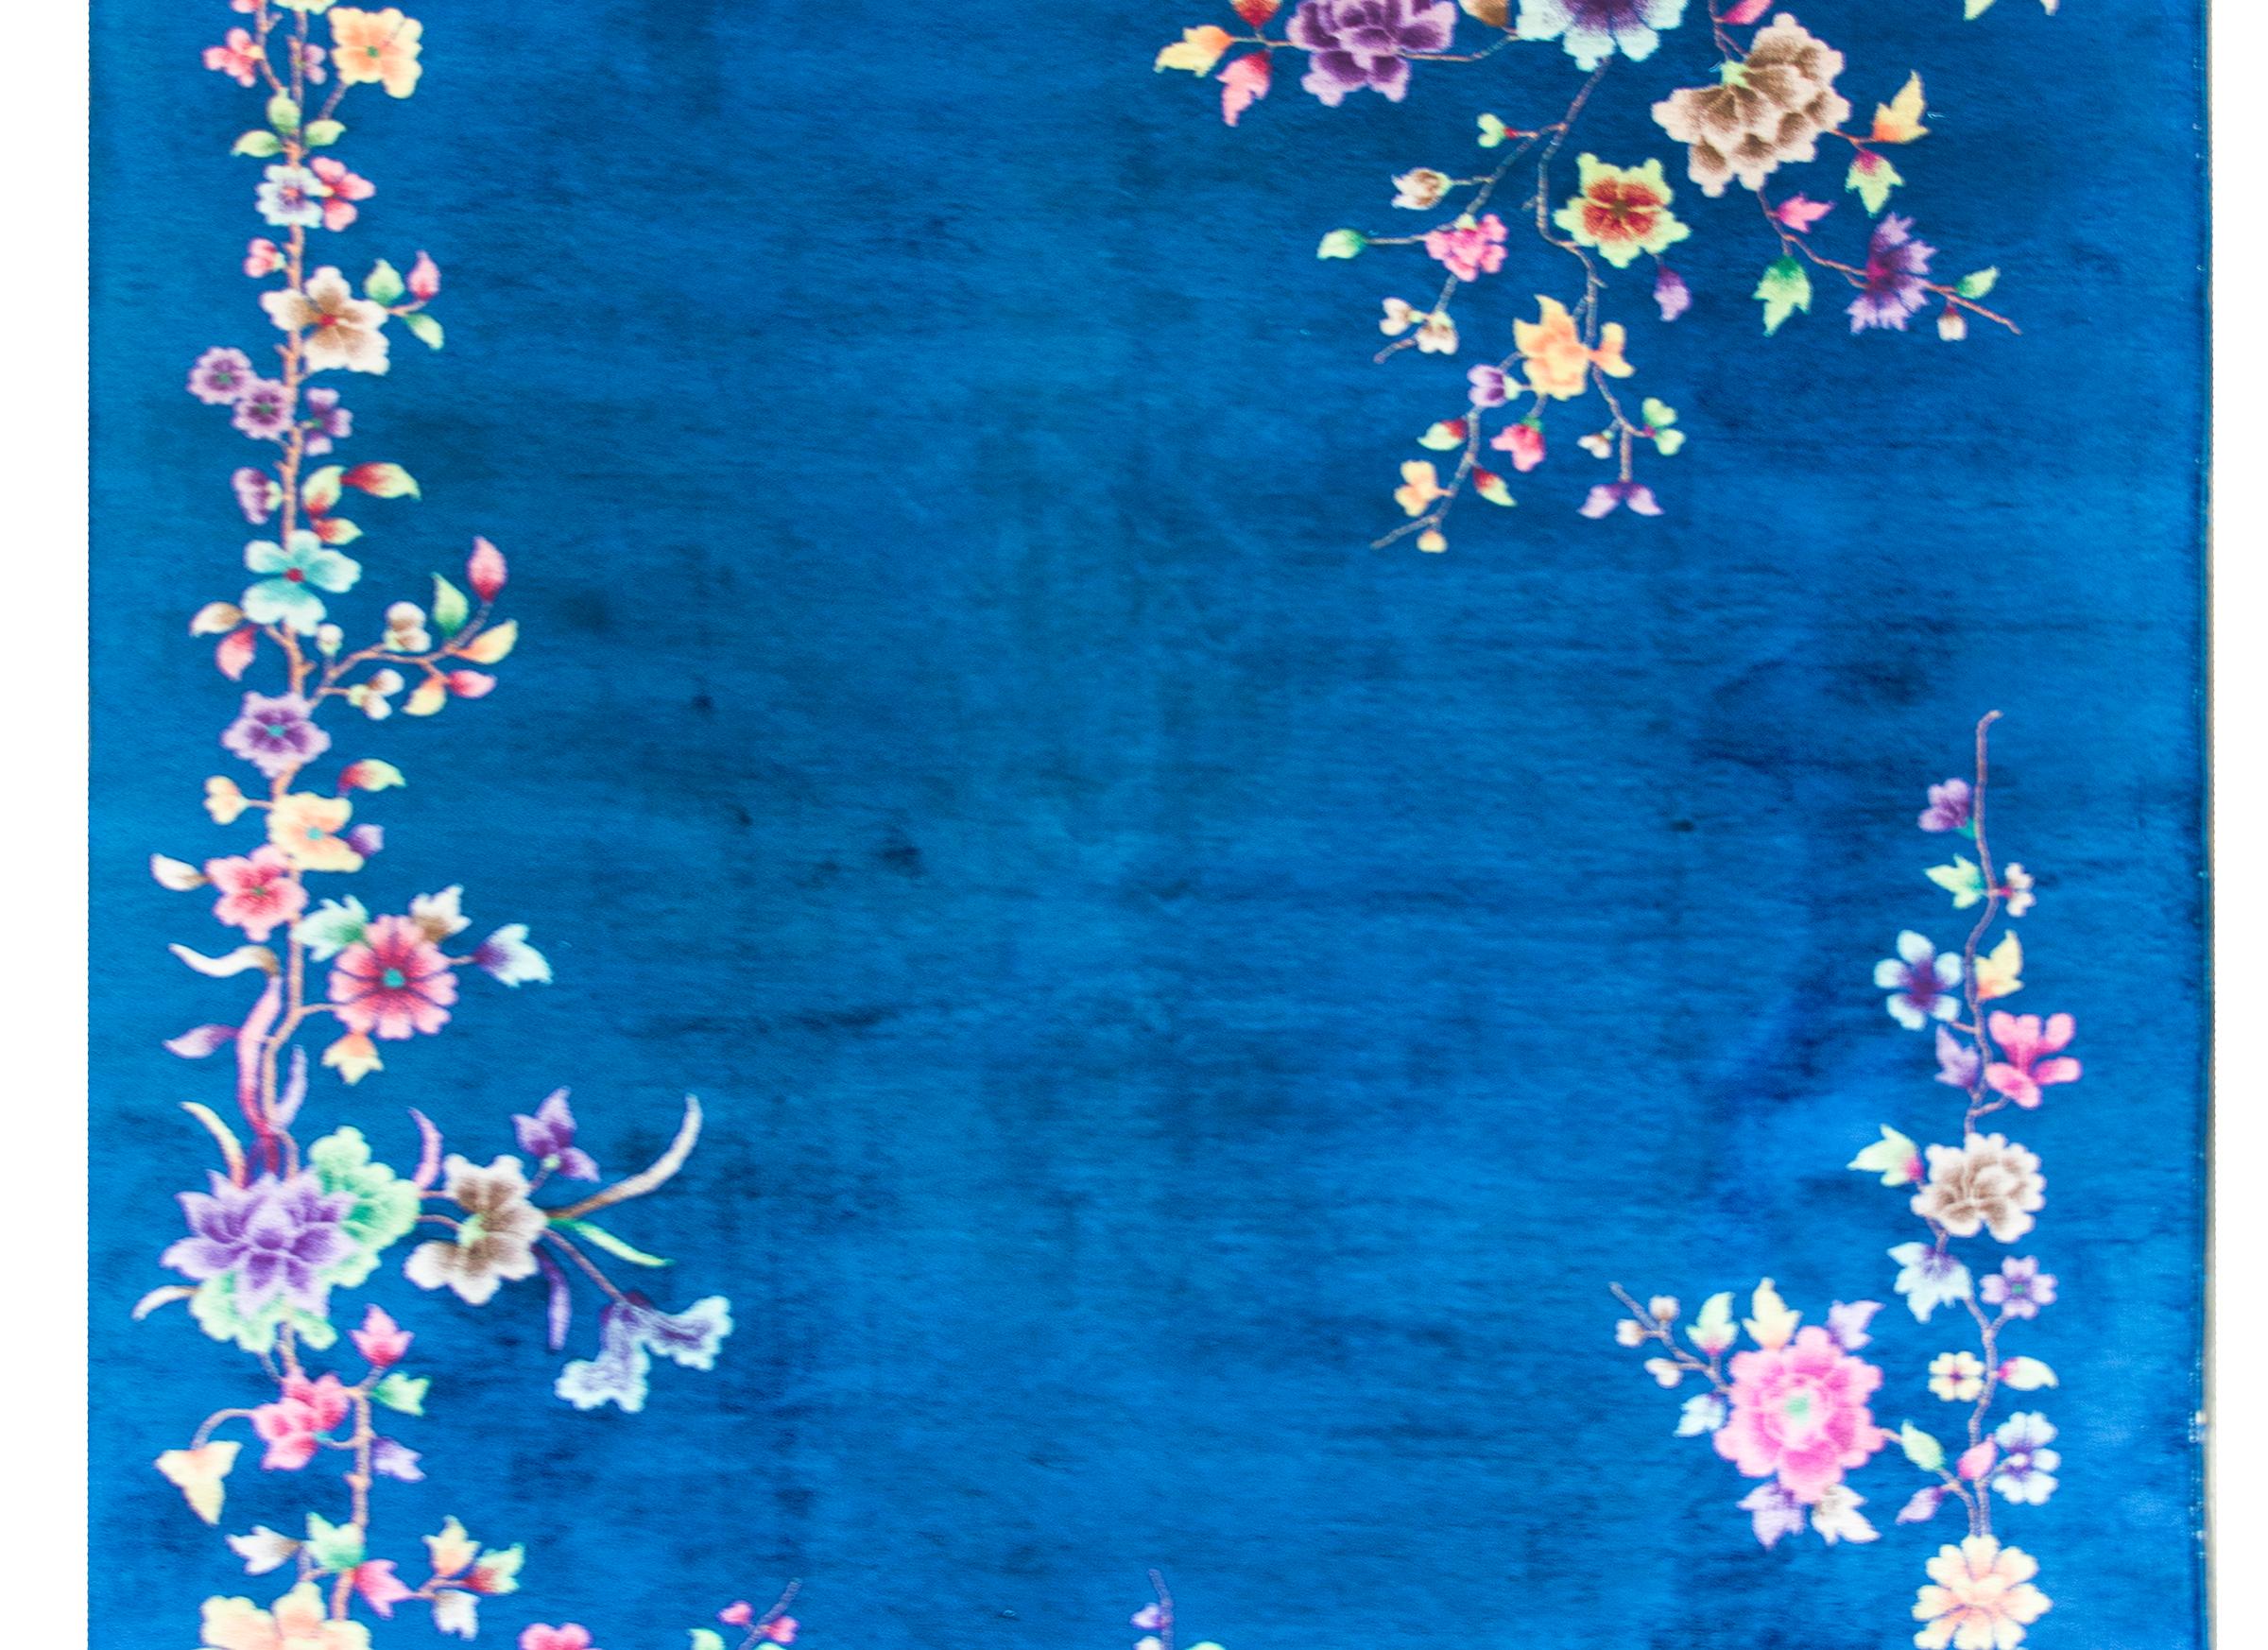 A stunning early 20th century Chinese Art Deco rug with a gorgeous cobalt blue field with an asymmetrical composition of multi-colored flowers including peonies, lotus, and chrysanthemums creating an incomplete border.